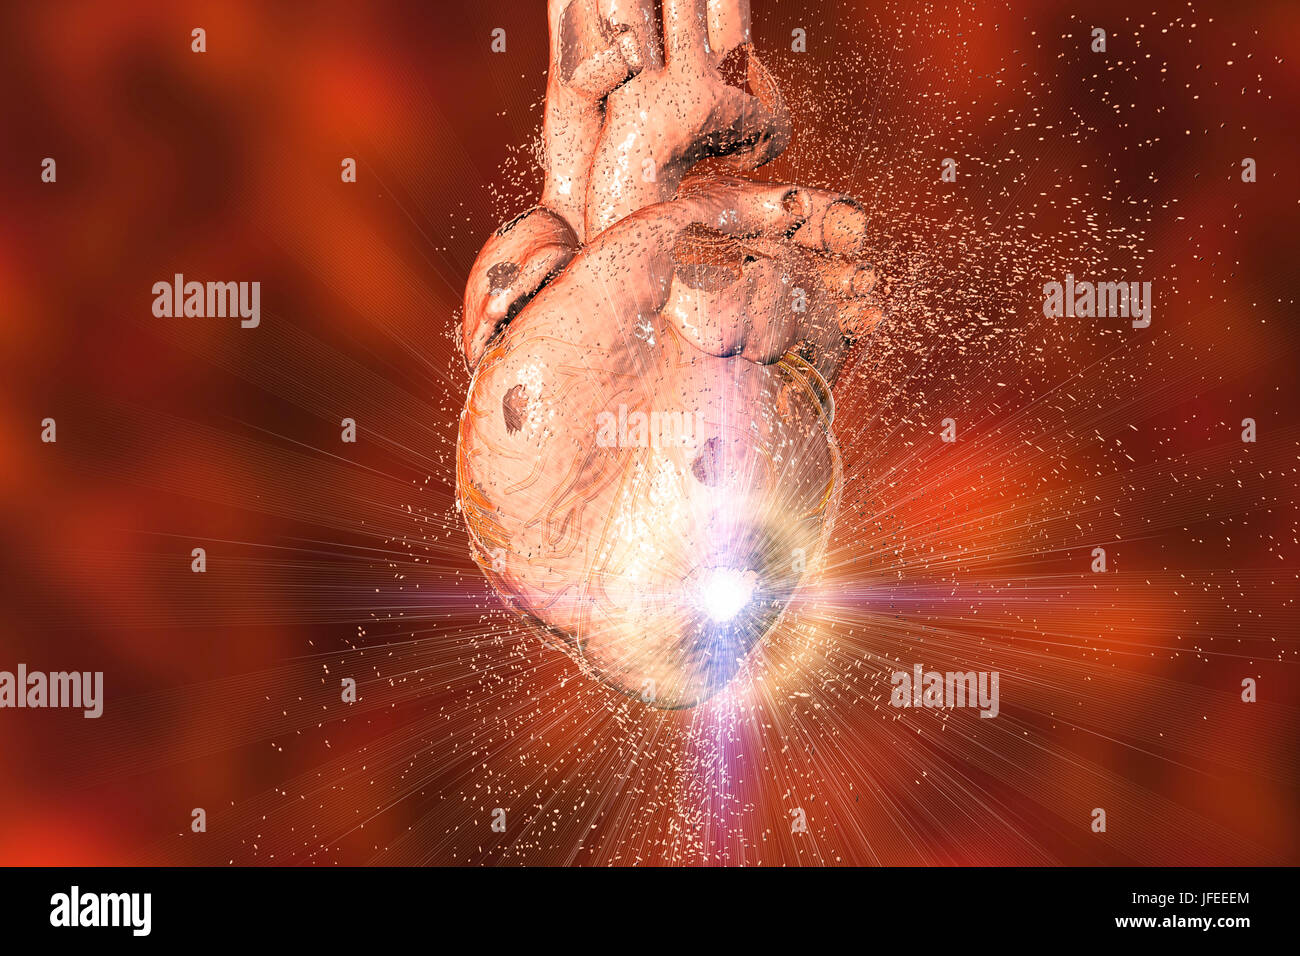 Heart destruction. Conceptual computer illustration that can be used to illustrate heart diseases. Stock Photo